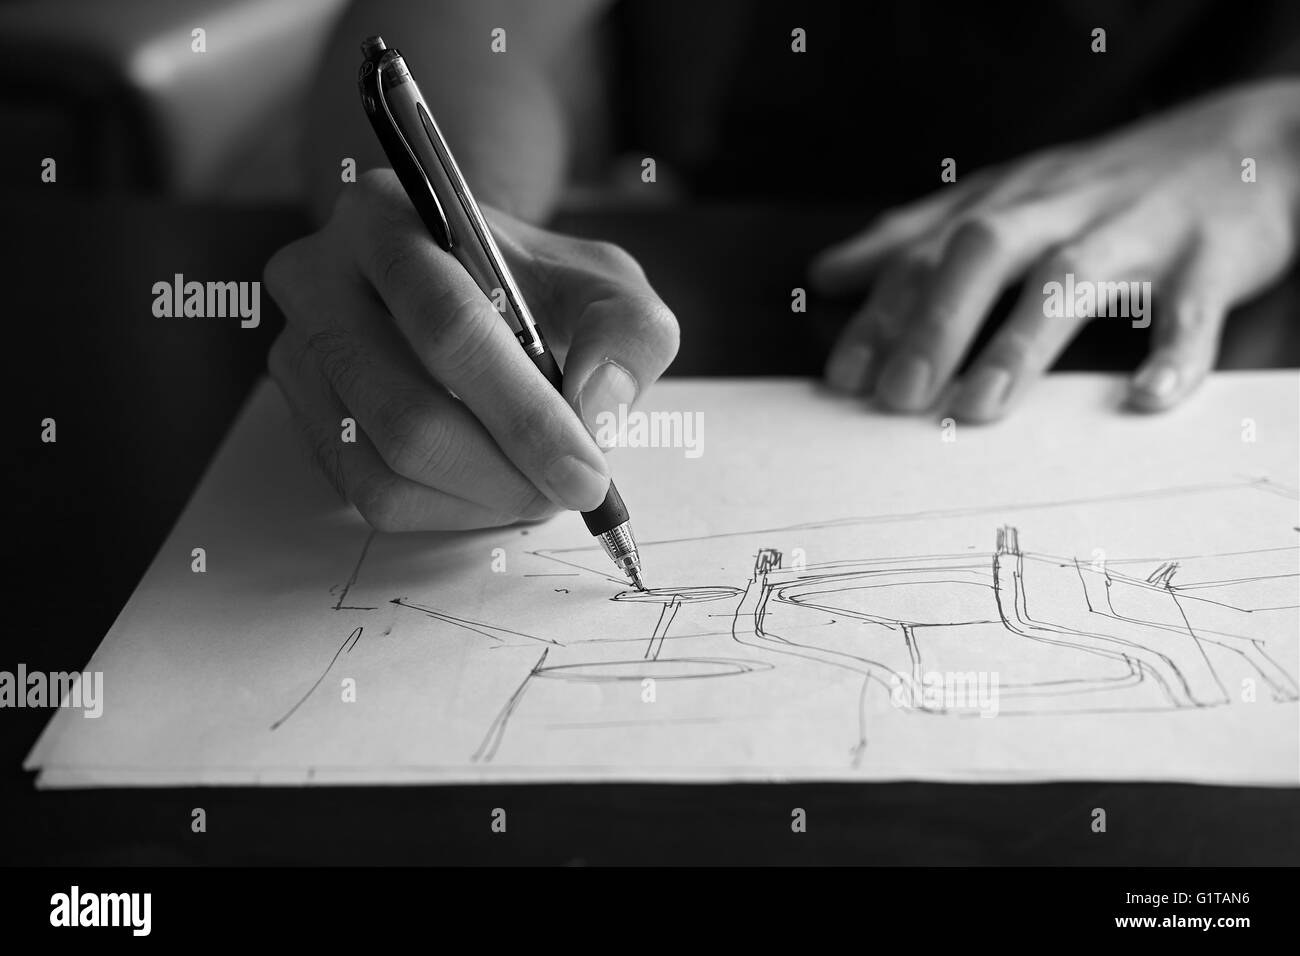 Hand of designer with his pen, designing and sketching his idea on sketchbook in monochrome Stock Photo